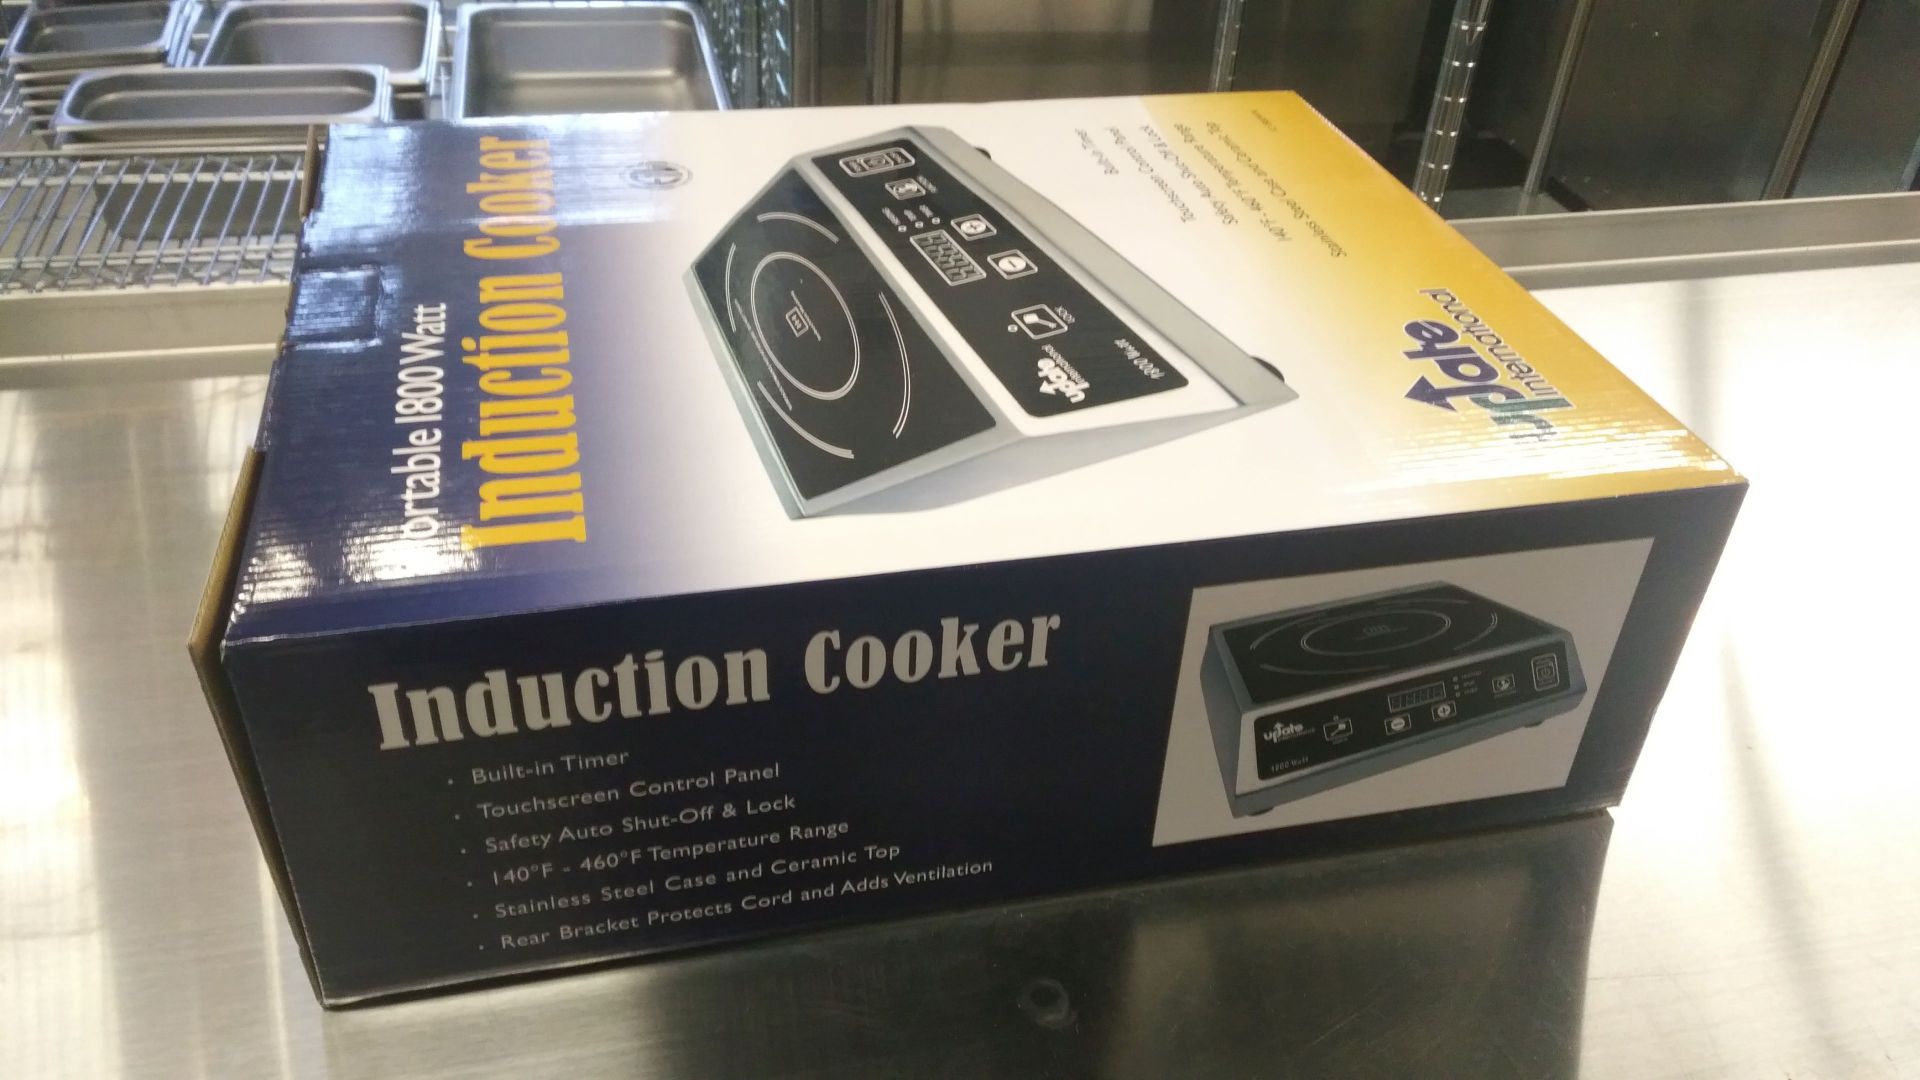 Update IC-1800WN Countertop Commercial Induction Cooktop - Image 5 of 7